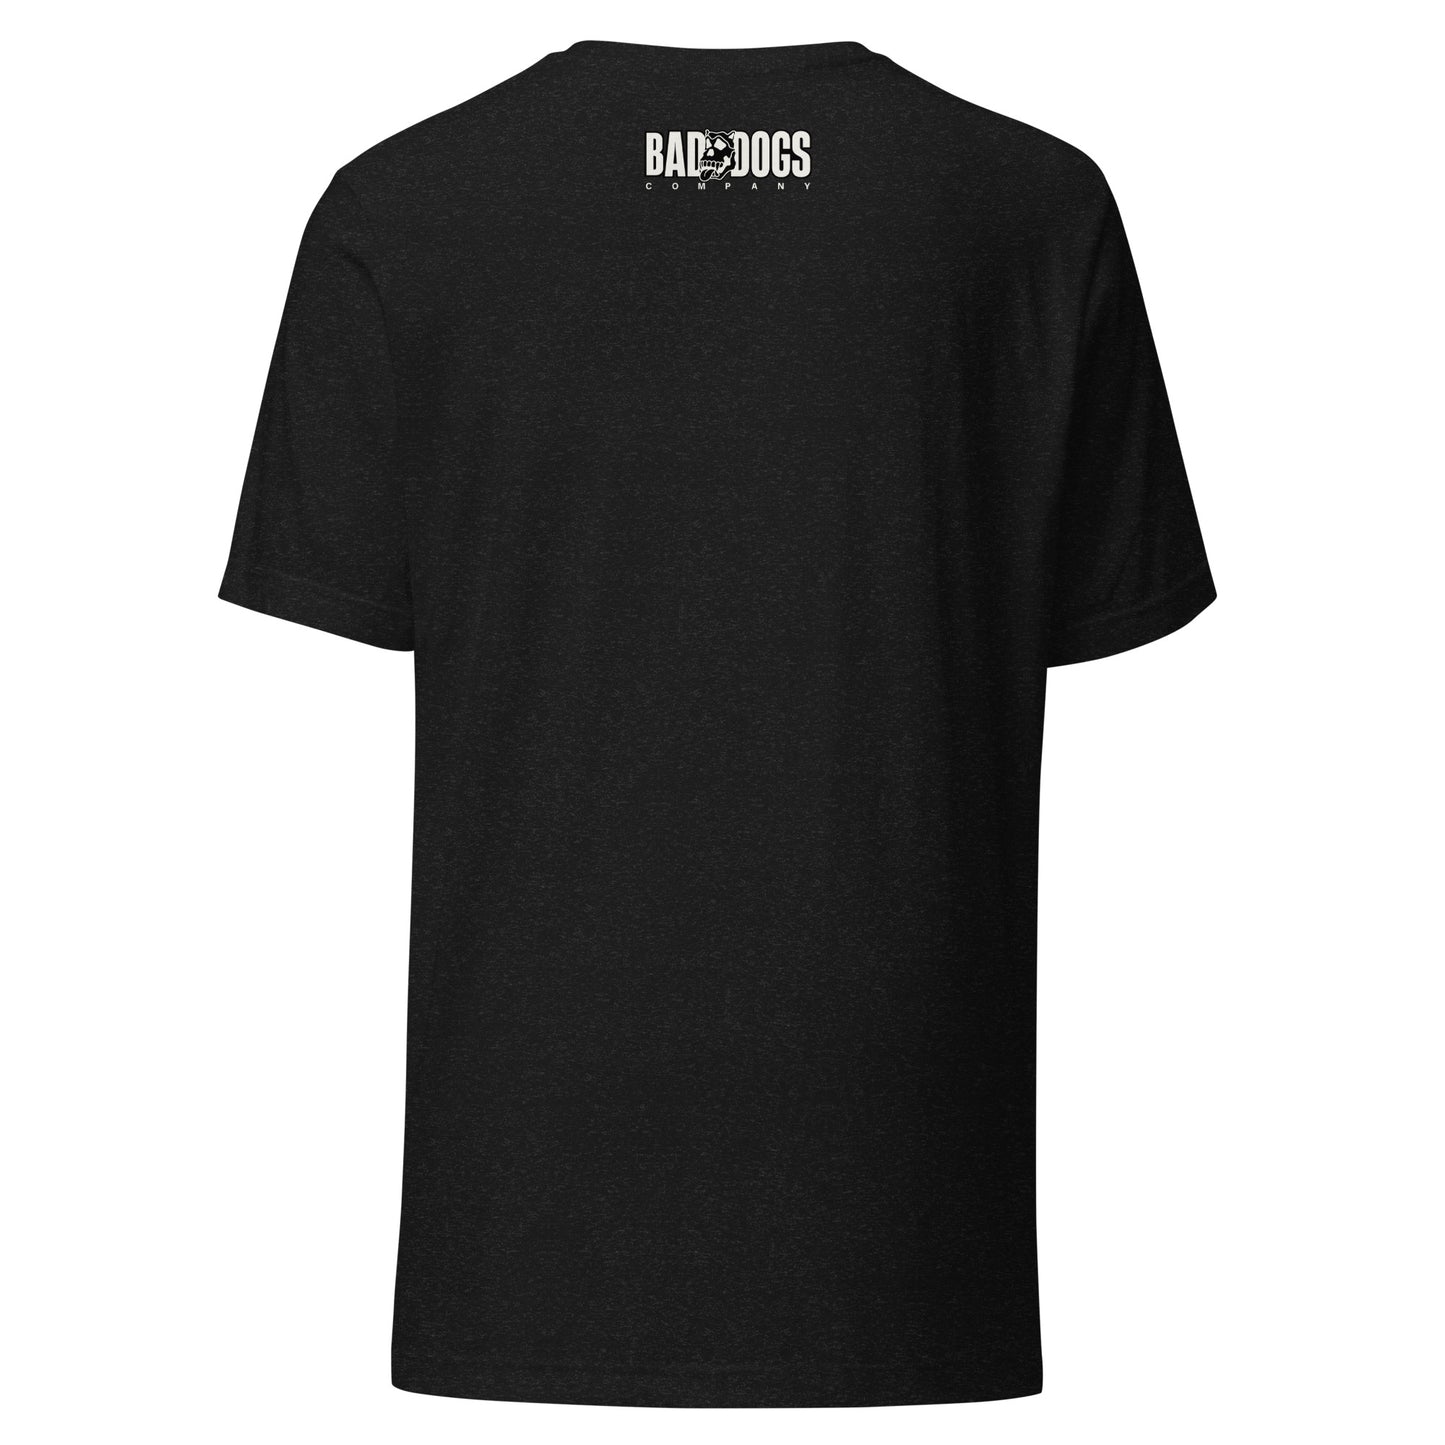 Bad Dogs Cities T-Shirt (Black)